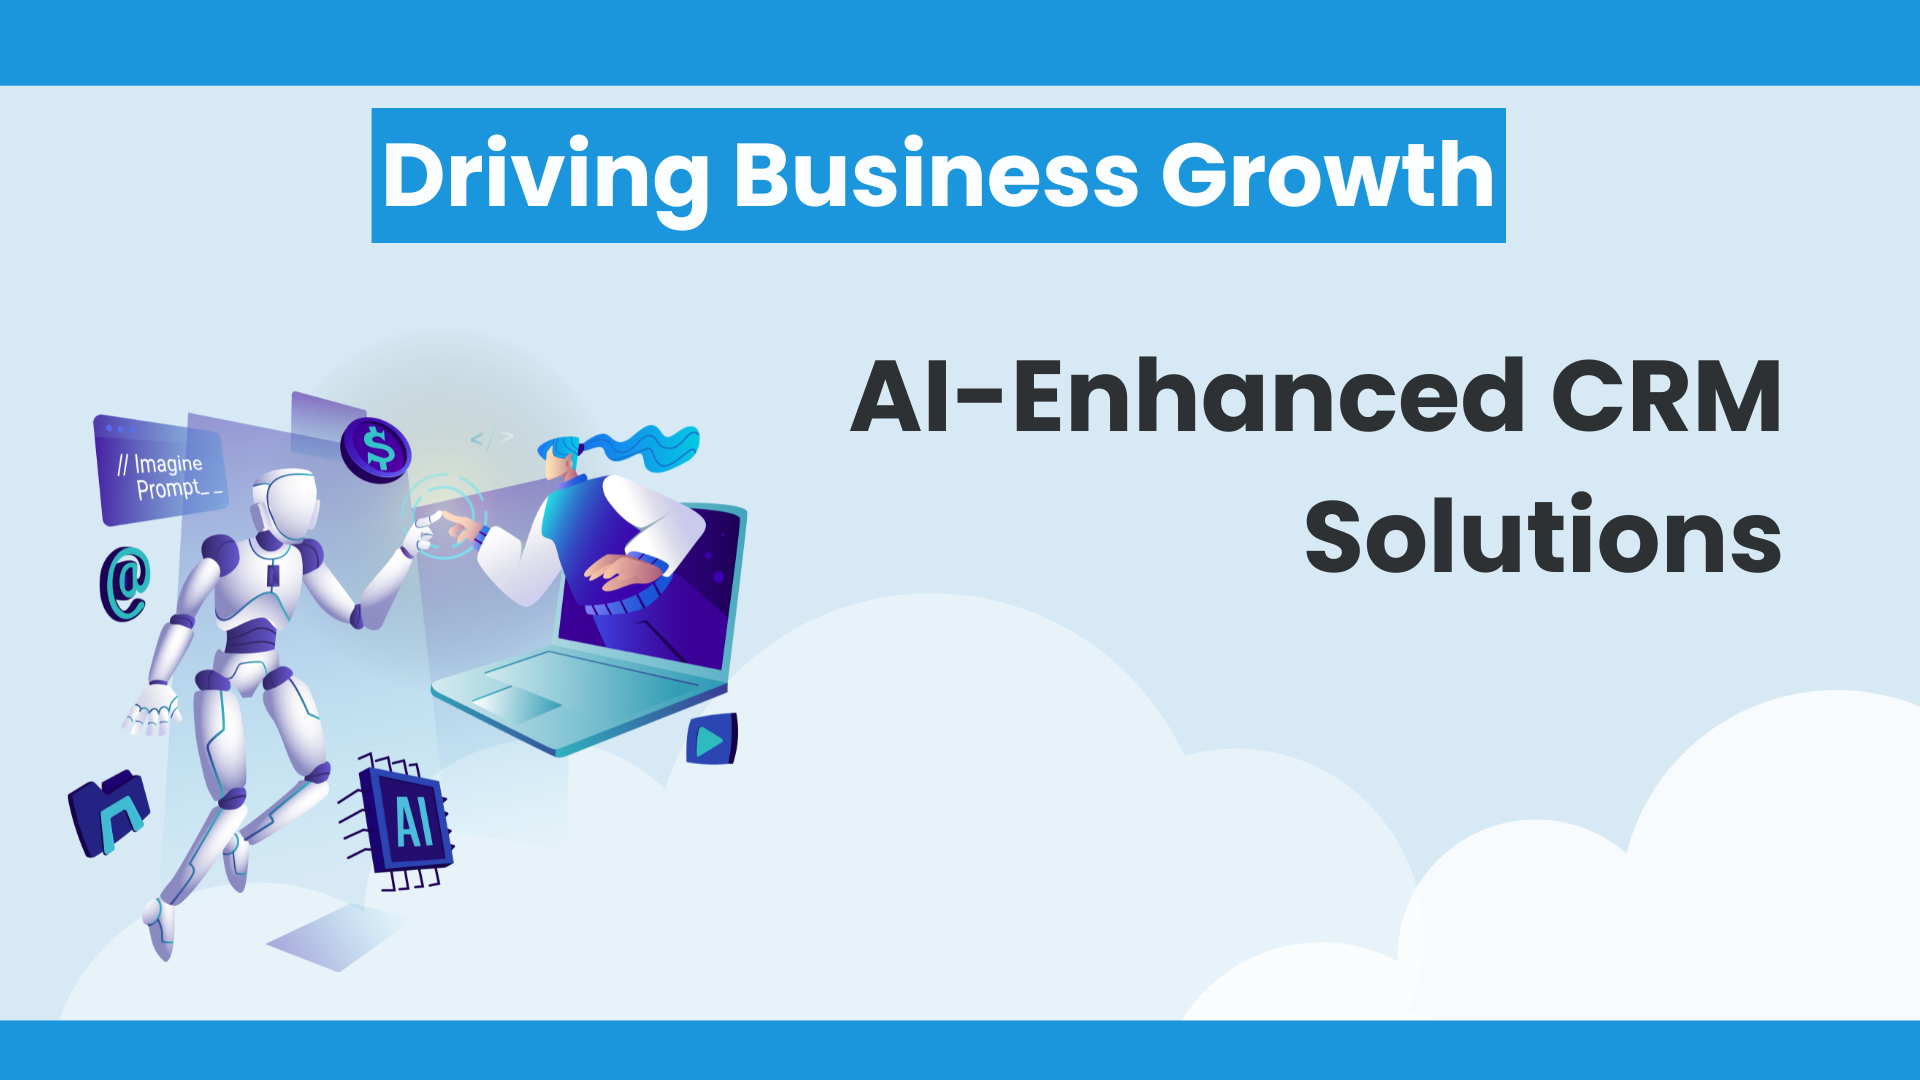 Driving Business Growth with AI-Enhanced CRM Solutions